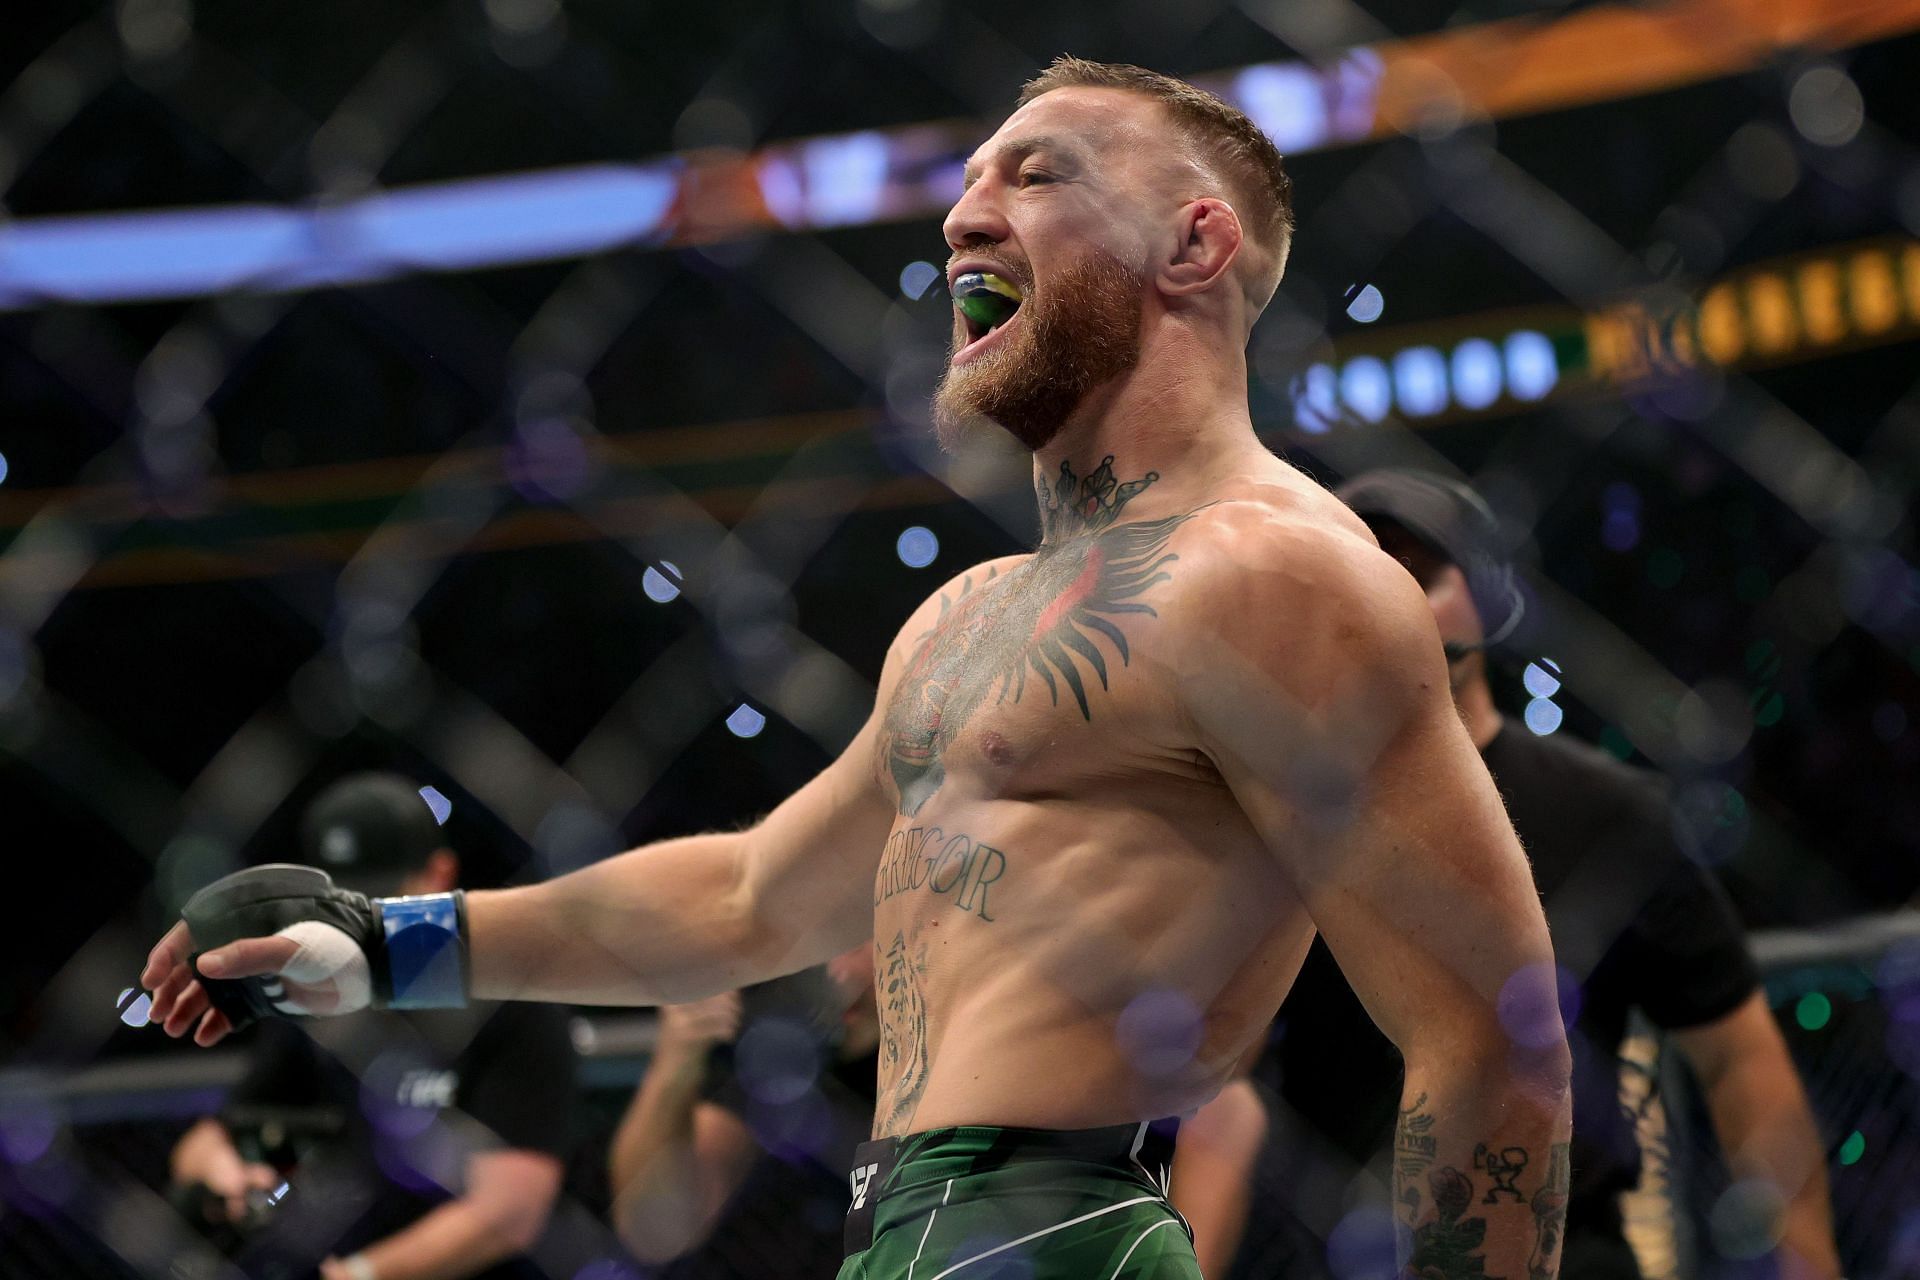 Conor McGregor vacated two titles before he had a chance to defend them